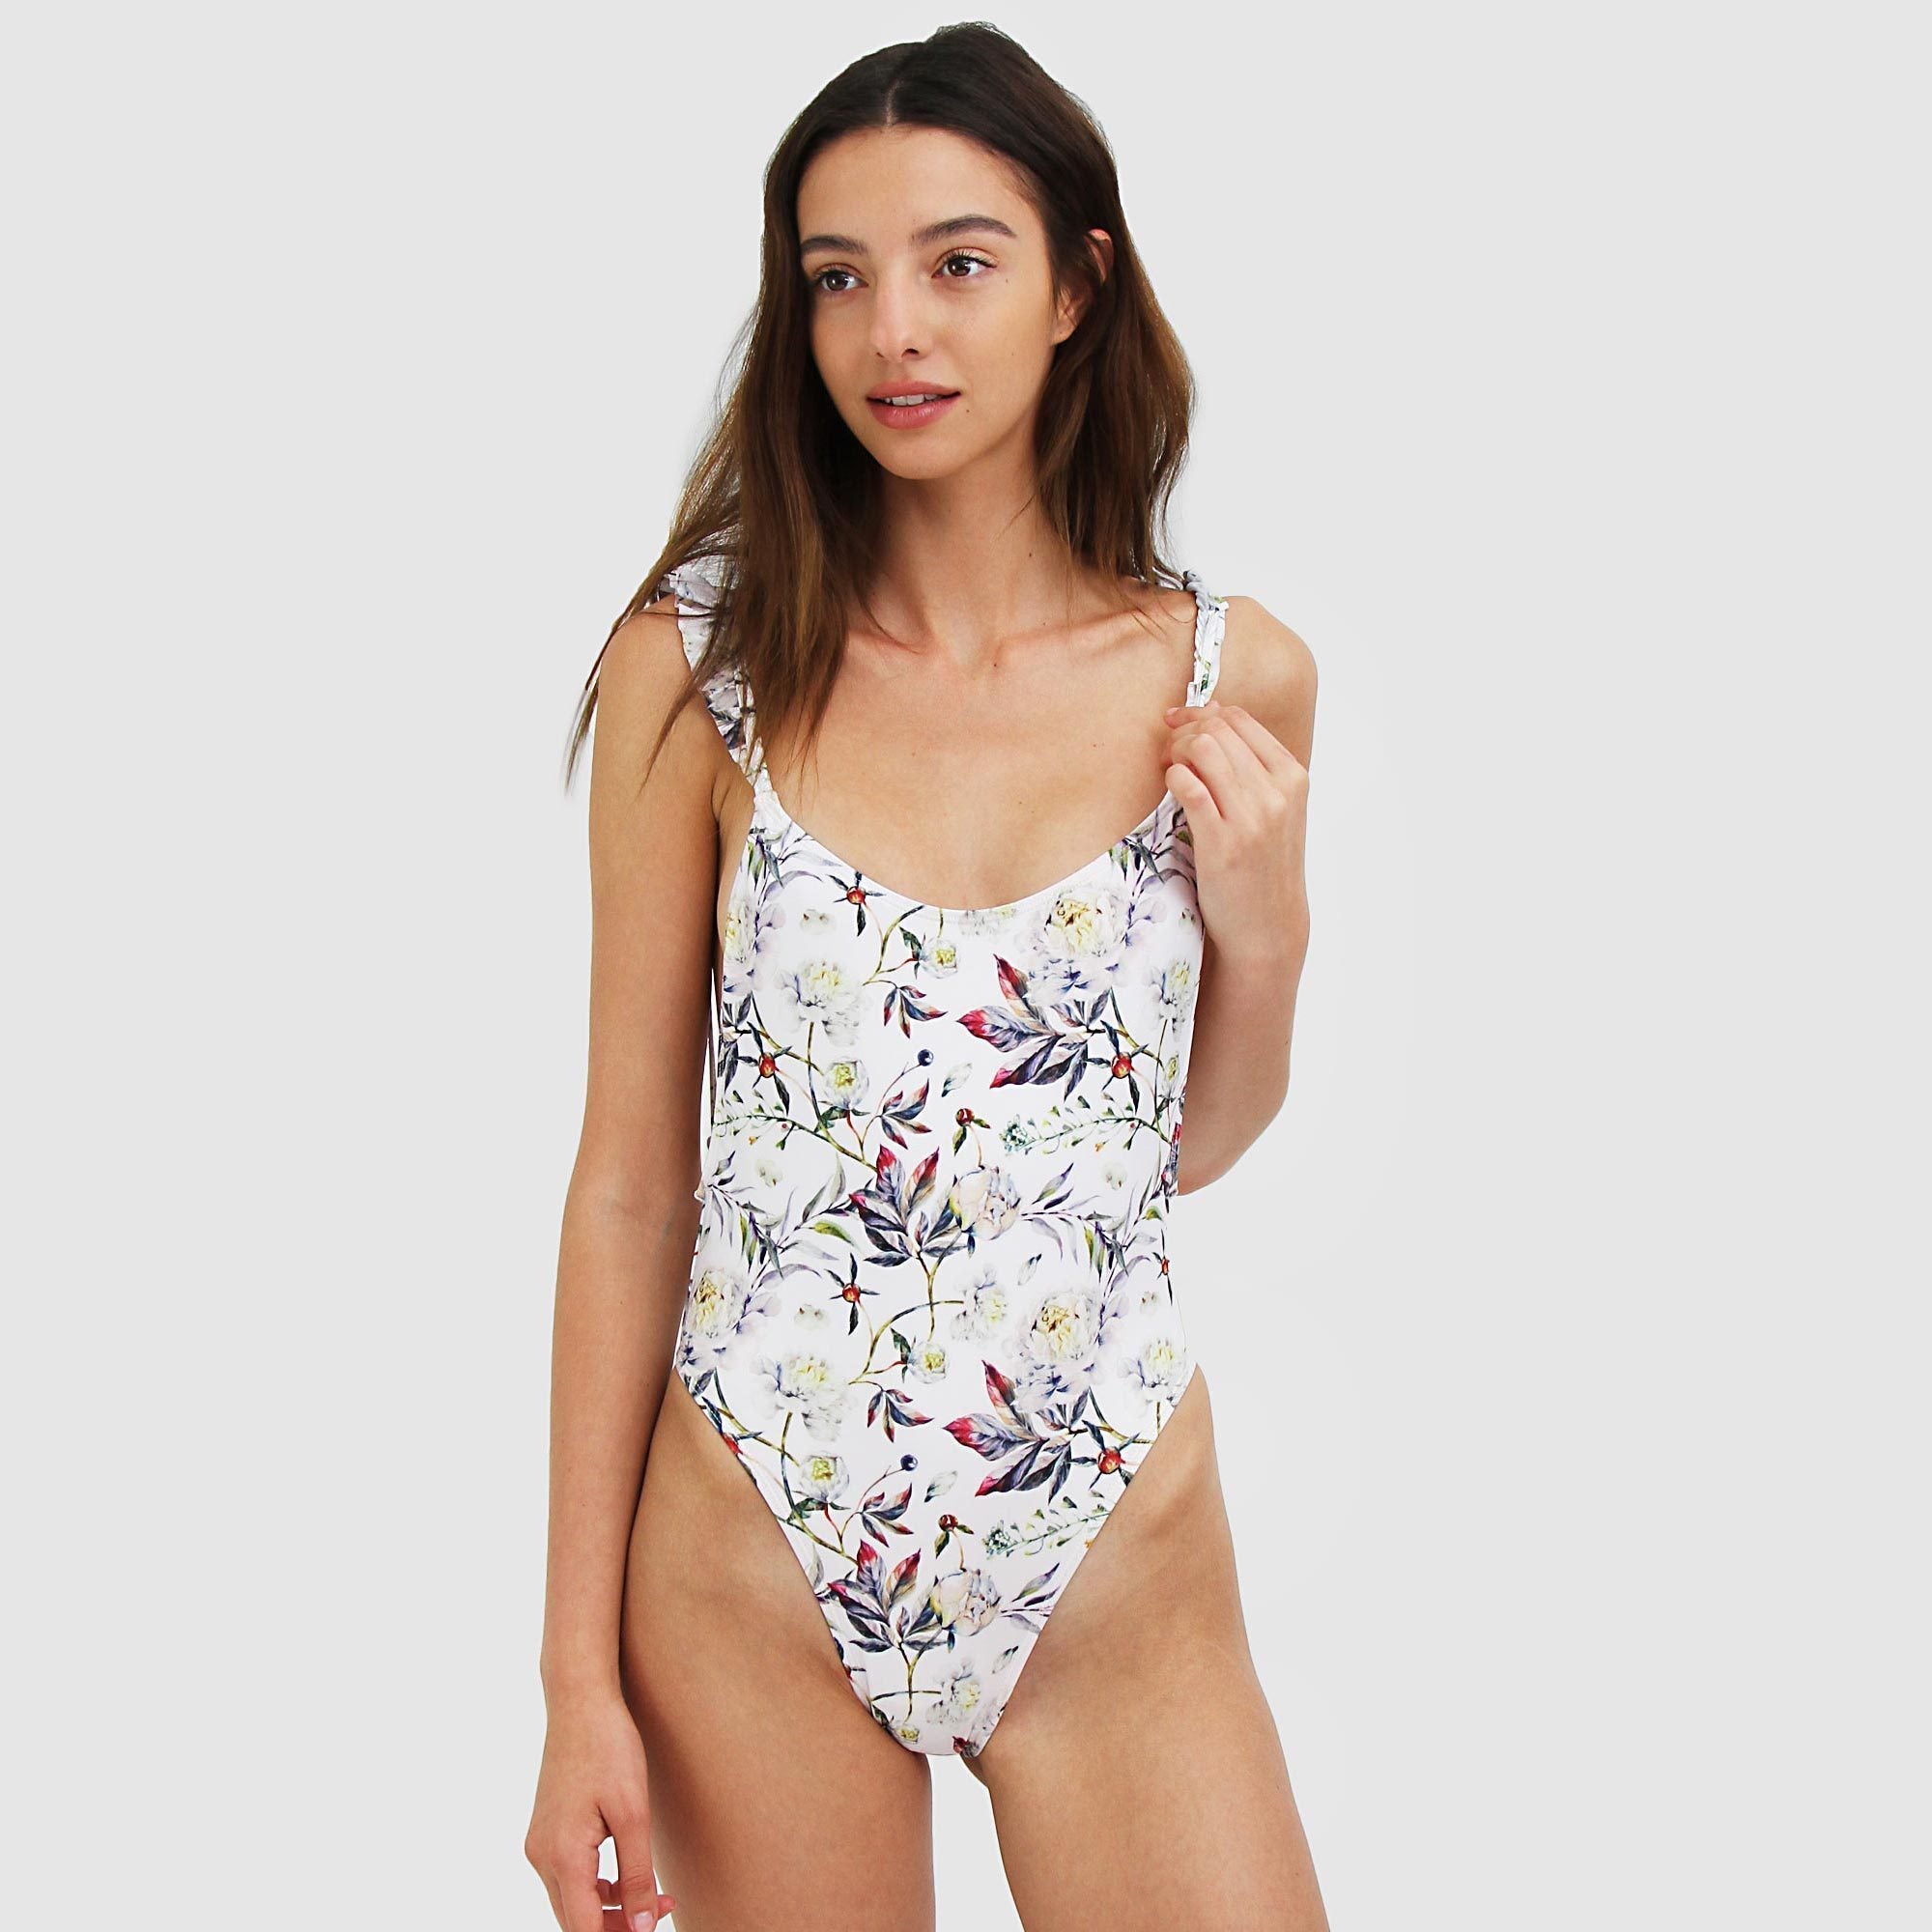 Women's floral swimsuit with flouncy straps